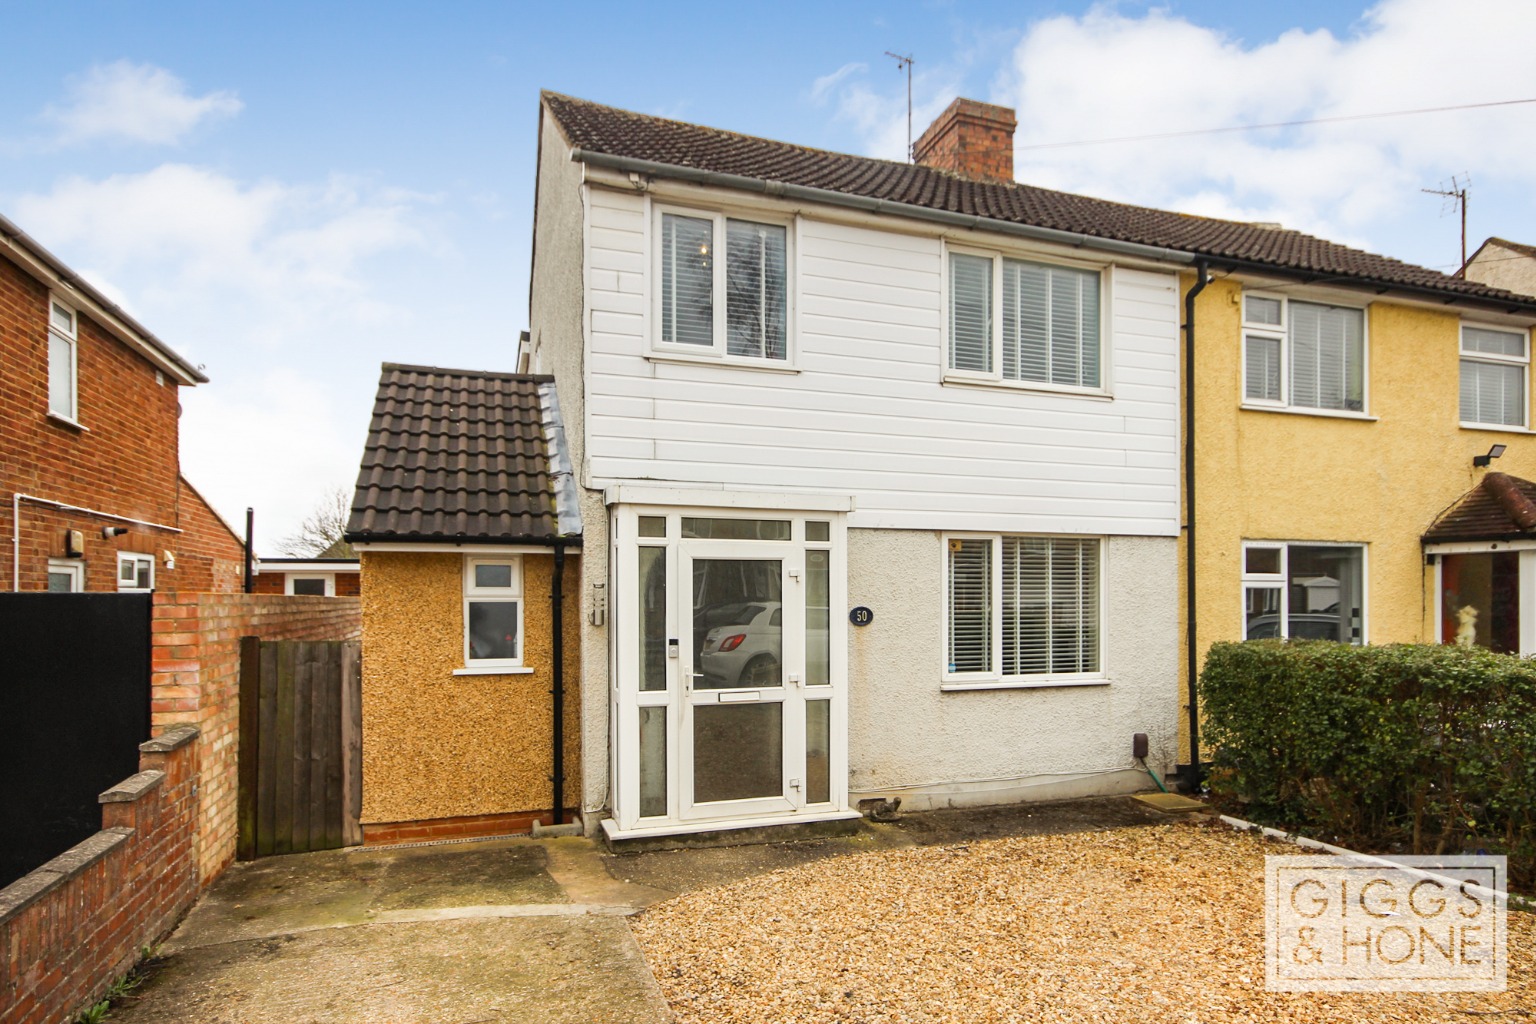 This extended family home located in Kempston sits on a generous plot and the hub of the home at the rear is a beautiful open plan kitchen/dining/family space.